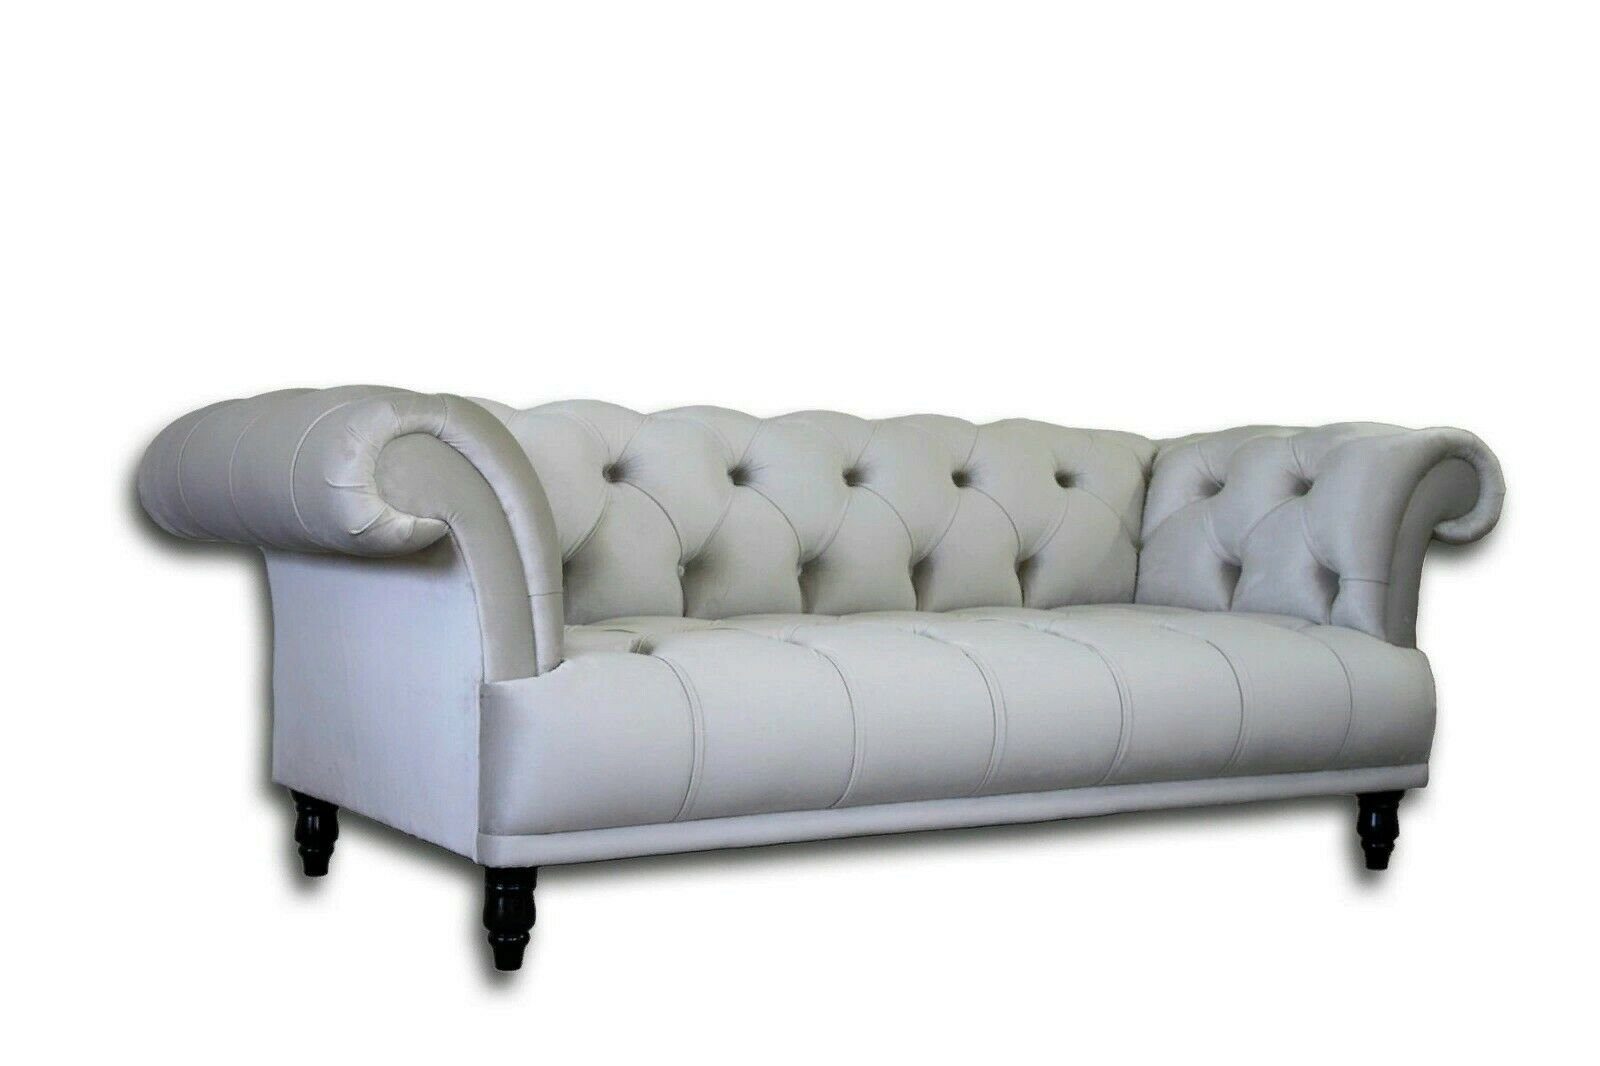 JVmoebel 3-Sitzer Design Chesterfield Klassik Weiß 3- Sitzer Couch Couch Polster Sofa, Made in Europe